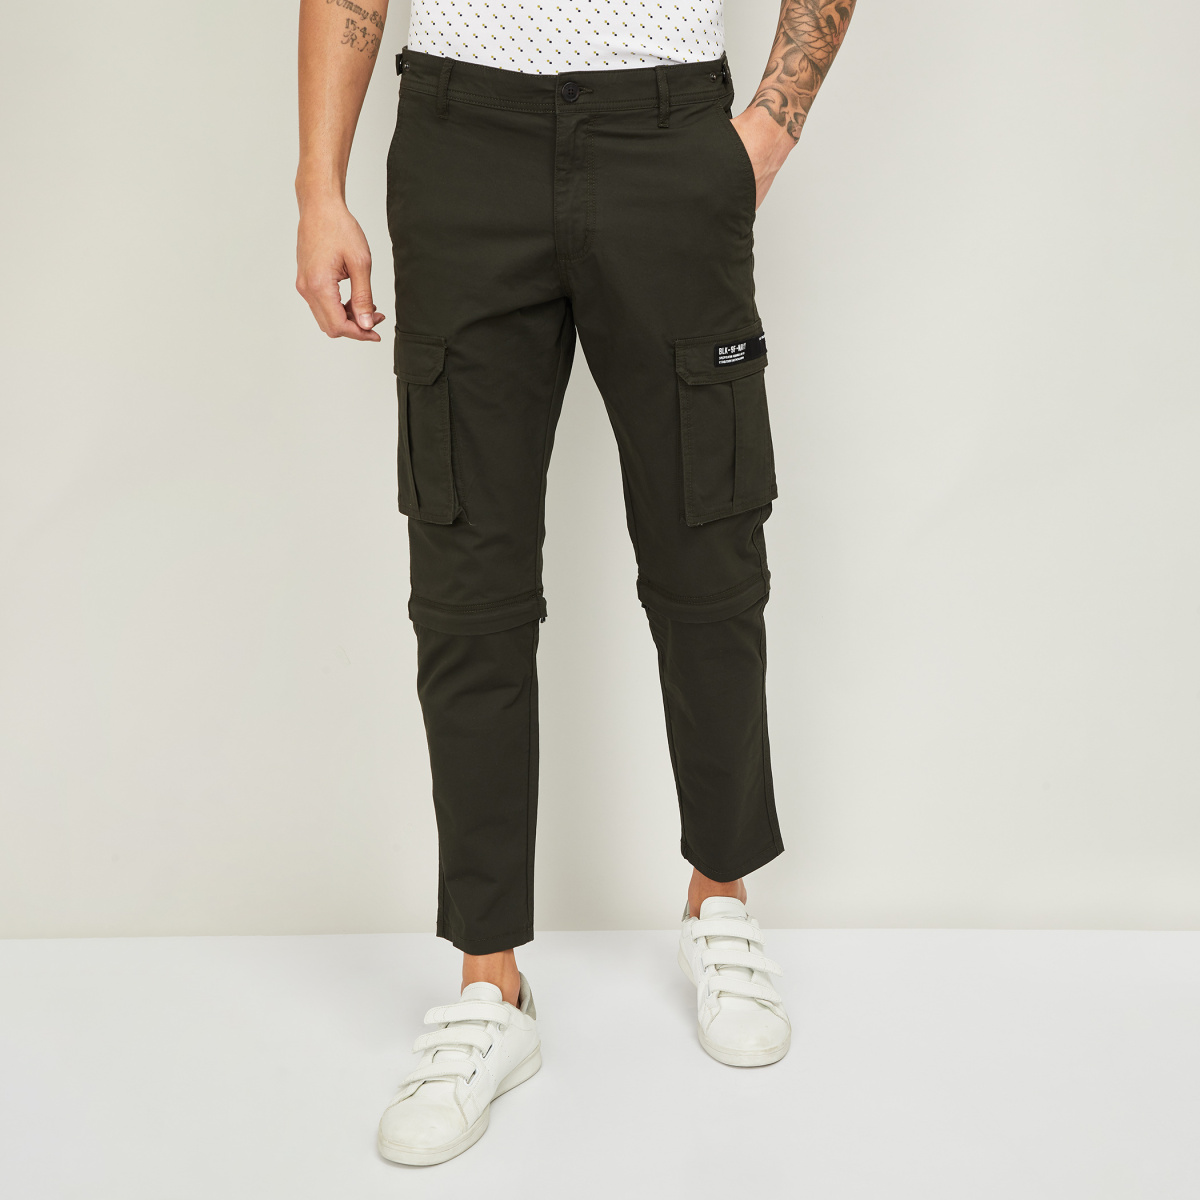 River Island tapered cargo trousers in khaki  ASOS